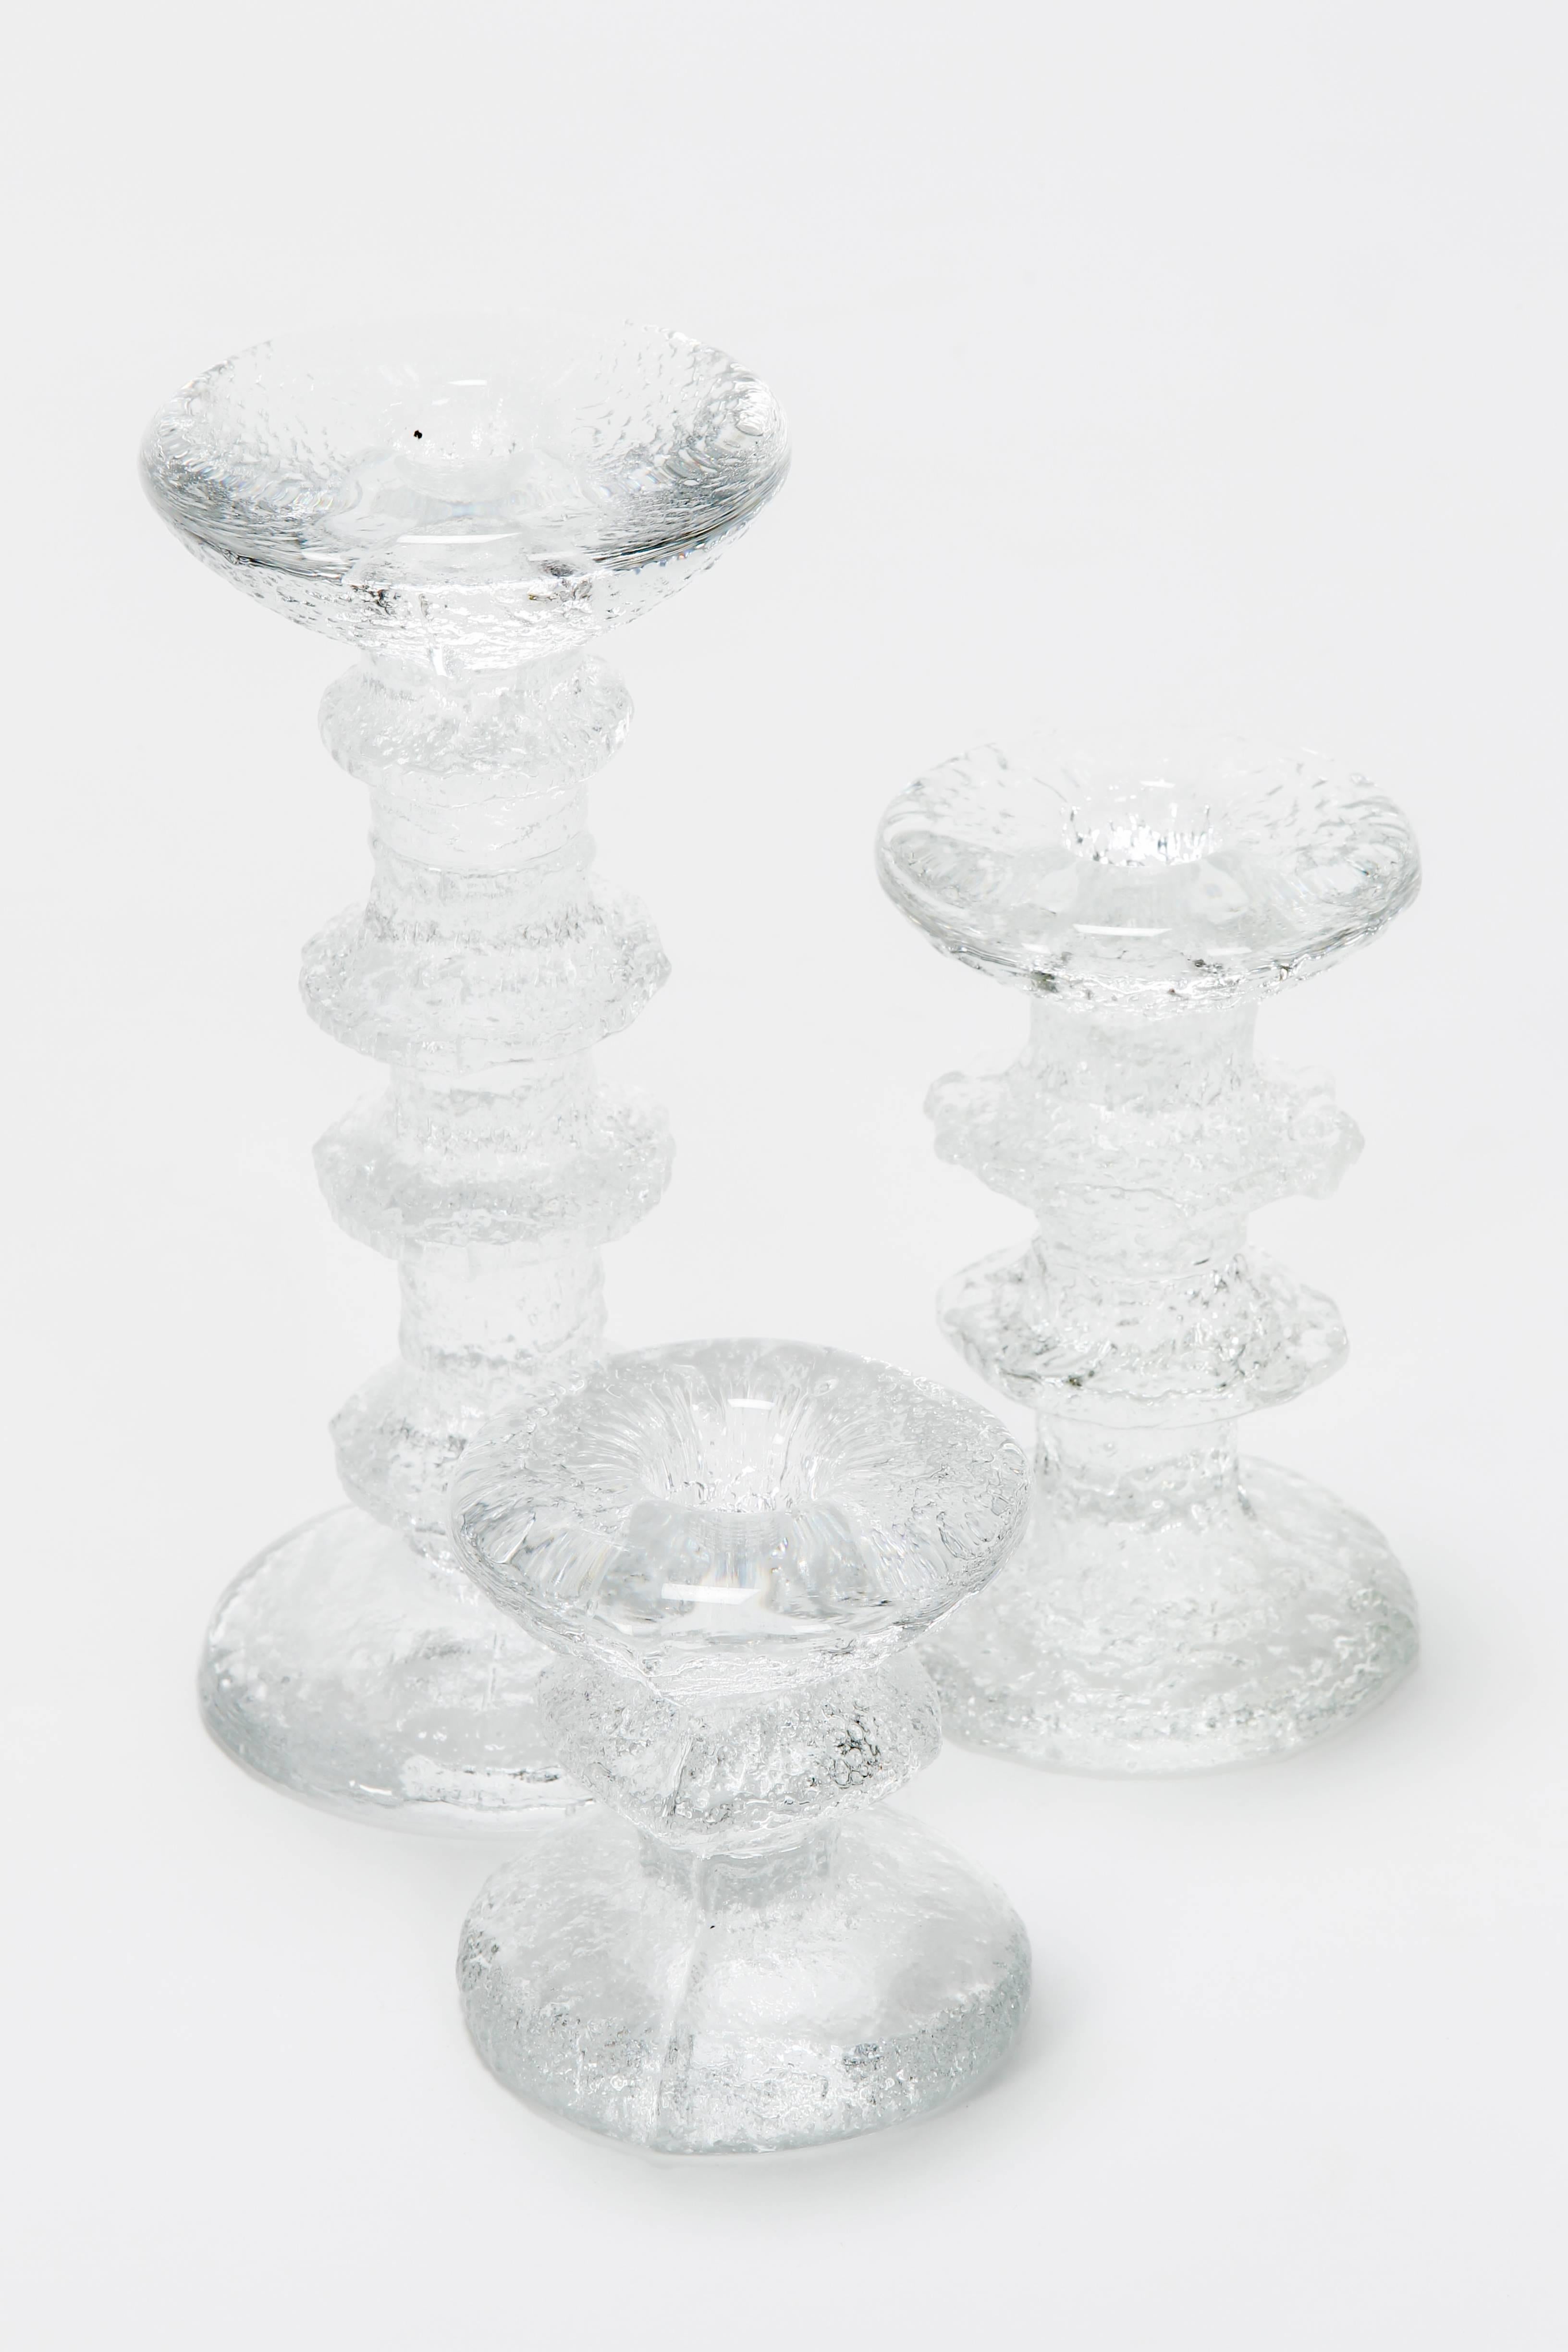 Timo Sarpaneva “Festivo” candle holders manufactured by Littala in the 1960s in Finland. Column shaped, textured glass candleholders. All are signed with the initials of the designer on the bottom.

Dimensions: Large
Diameter 8 cm
Height 17